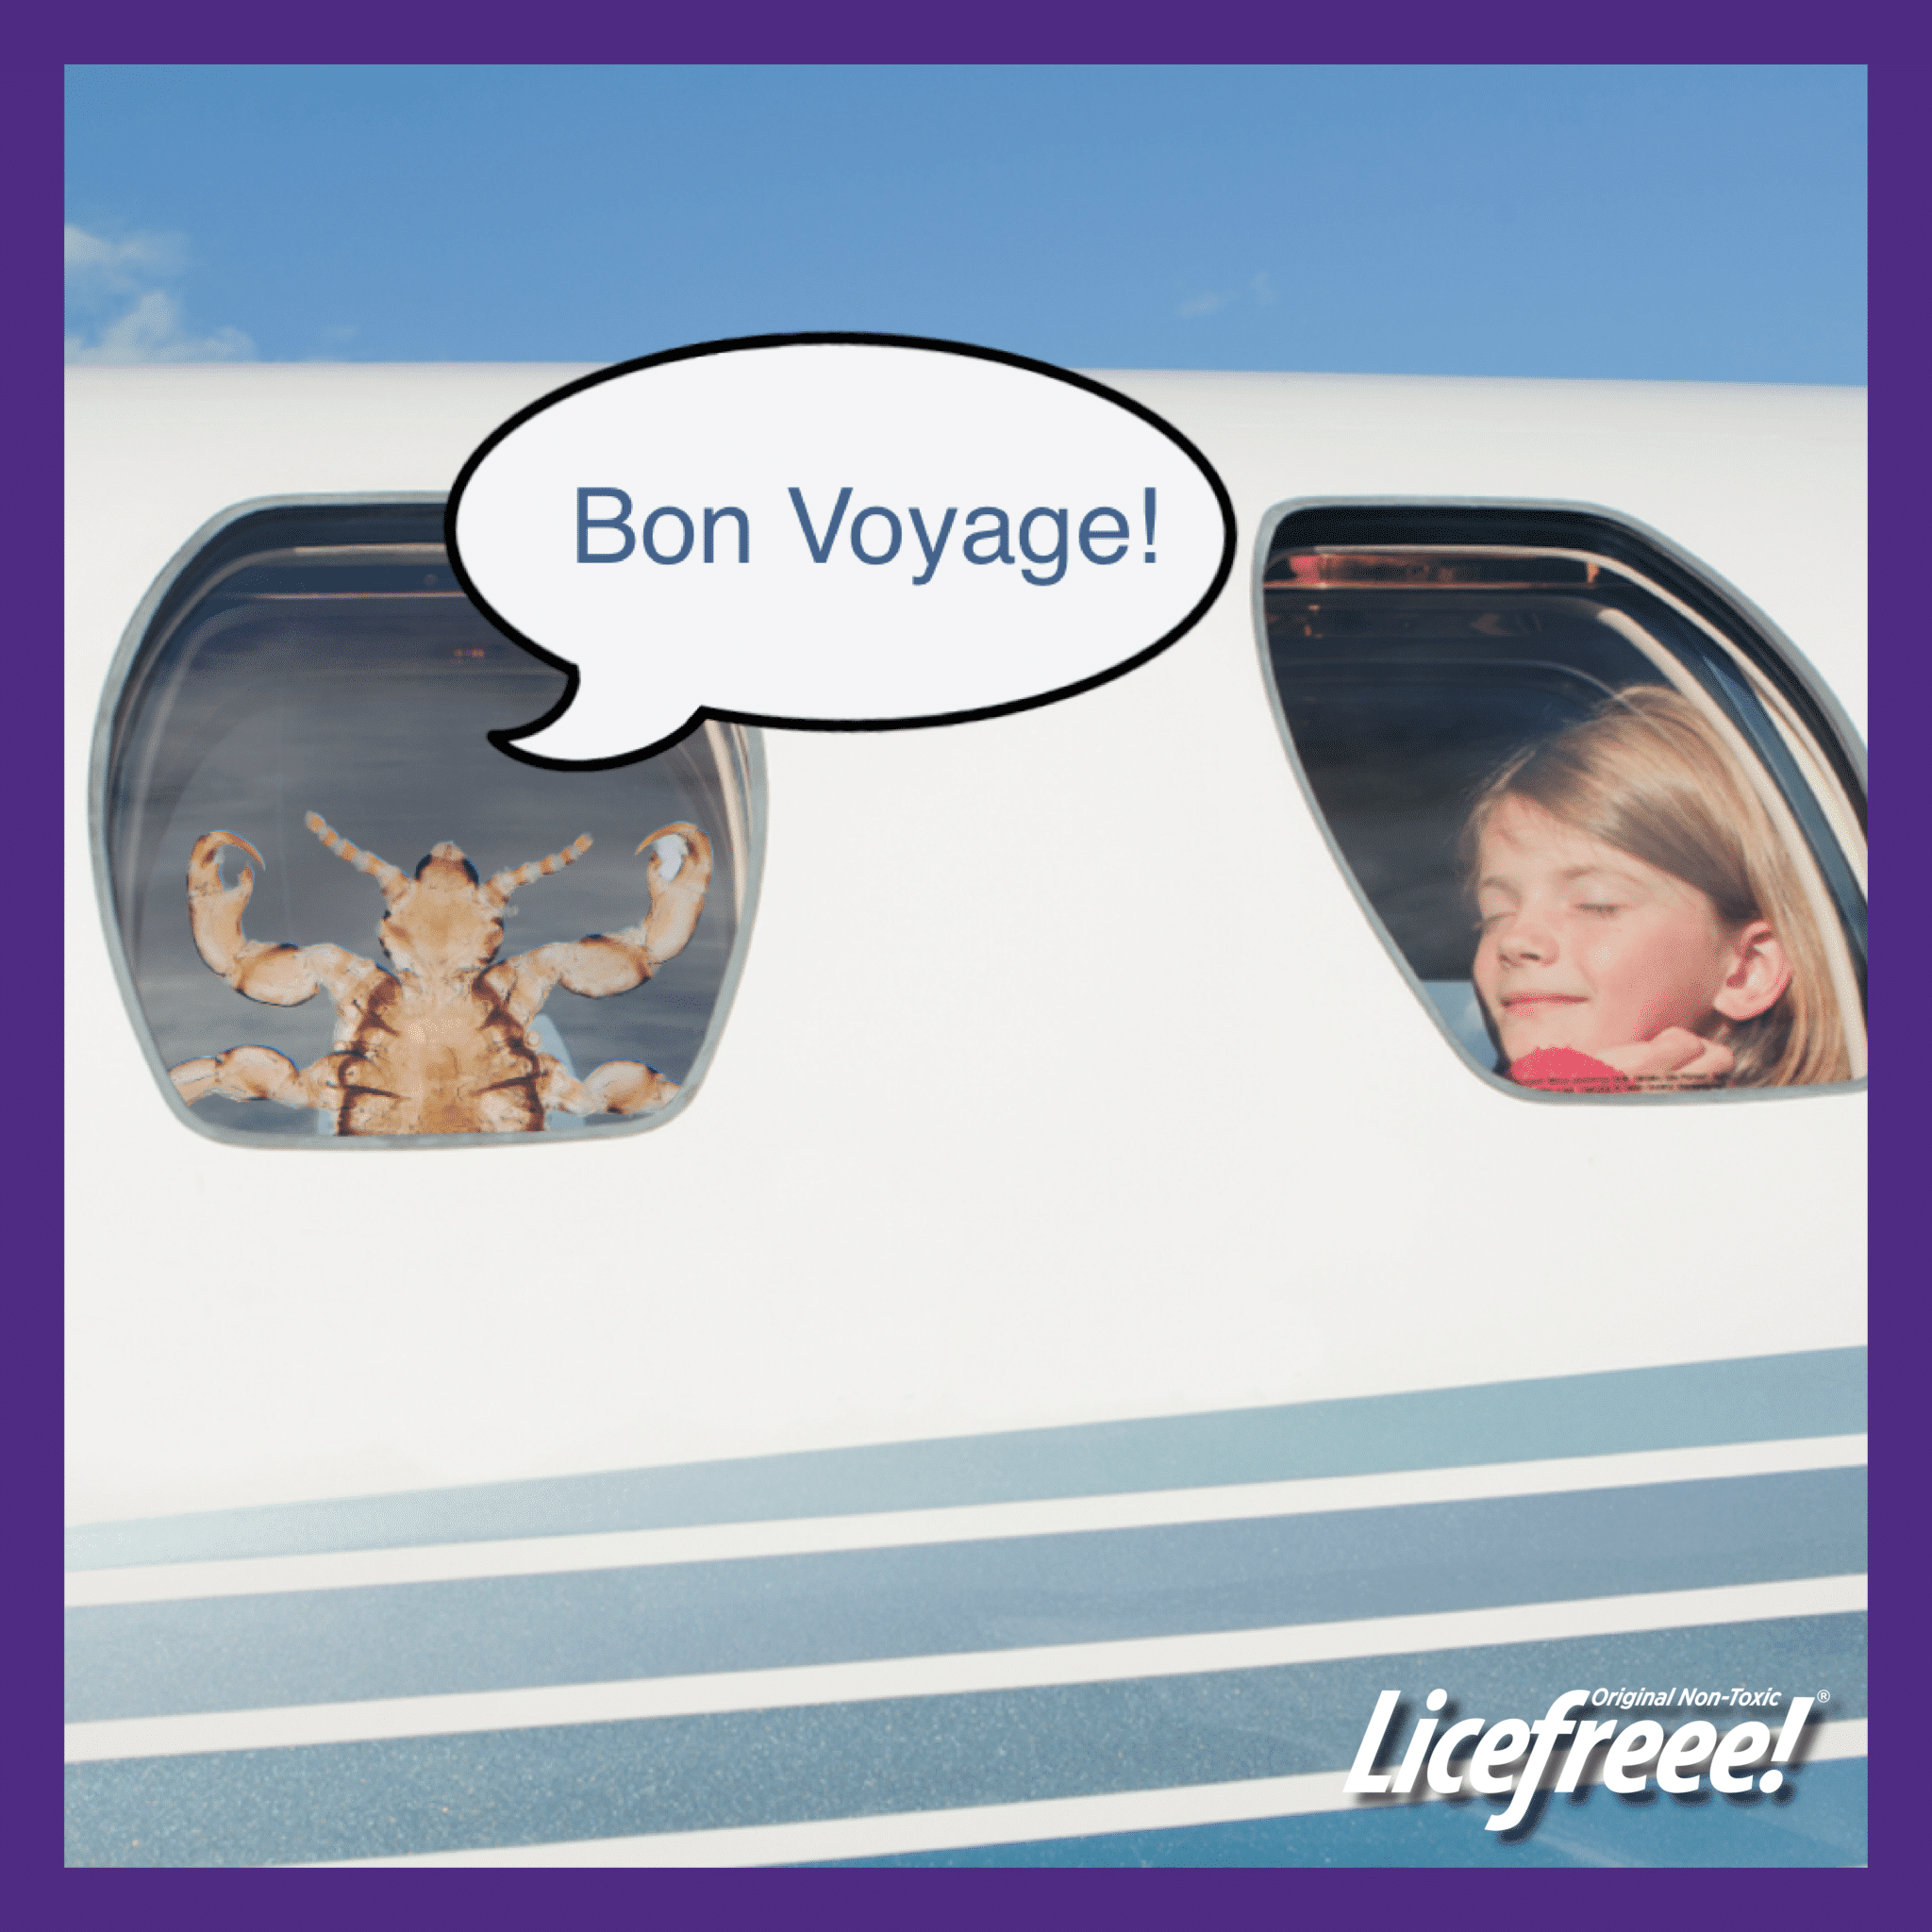 Two airplane windows where one has a girl inside enjoying the ride while the other window has giant lice with a speech balloon that says Bon Voyage.